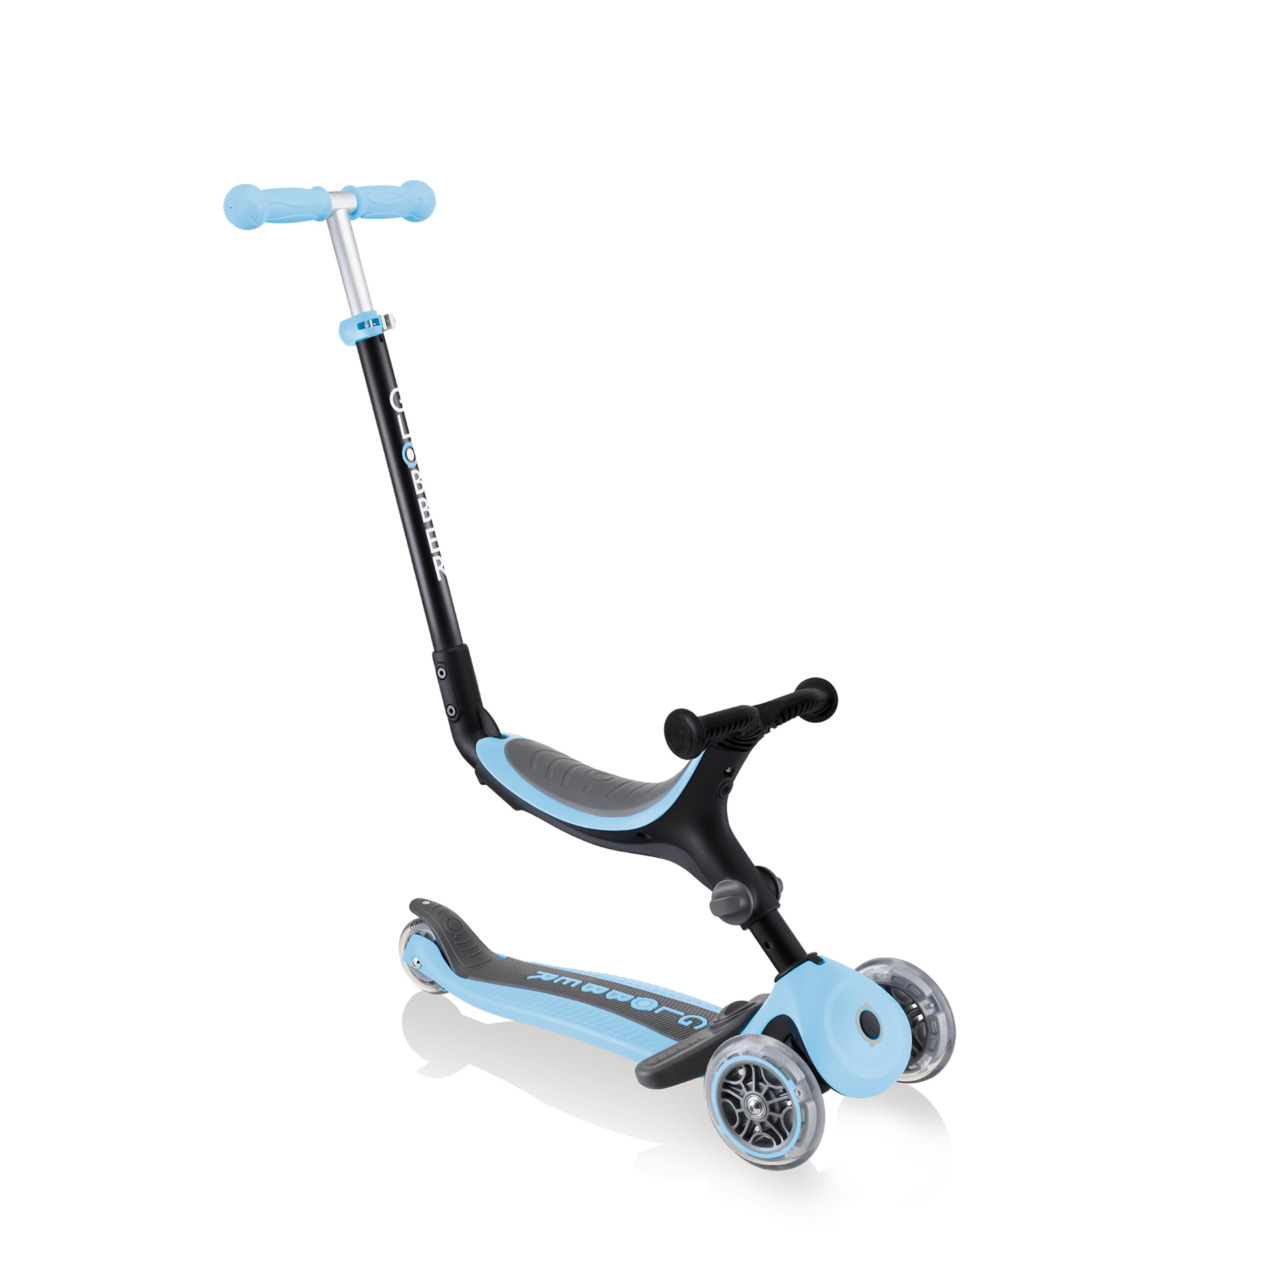 741 200 3 In 1 Scooter For Toddlers